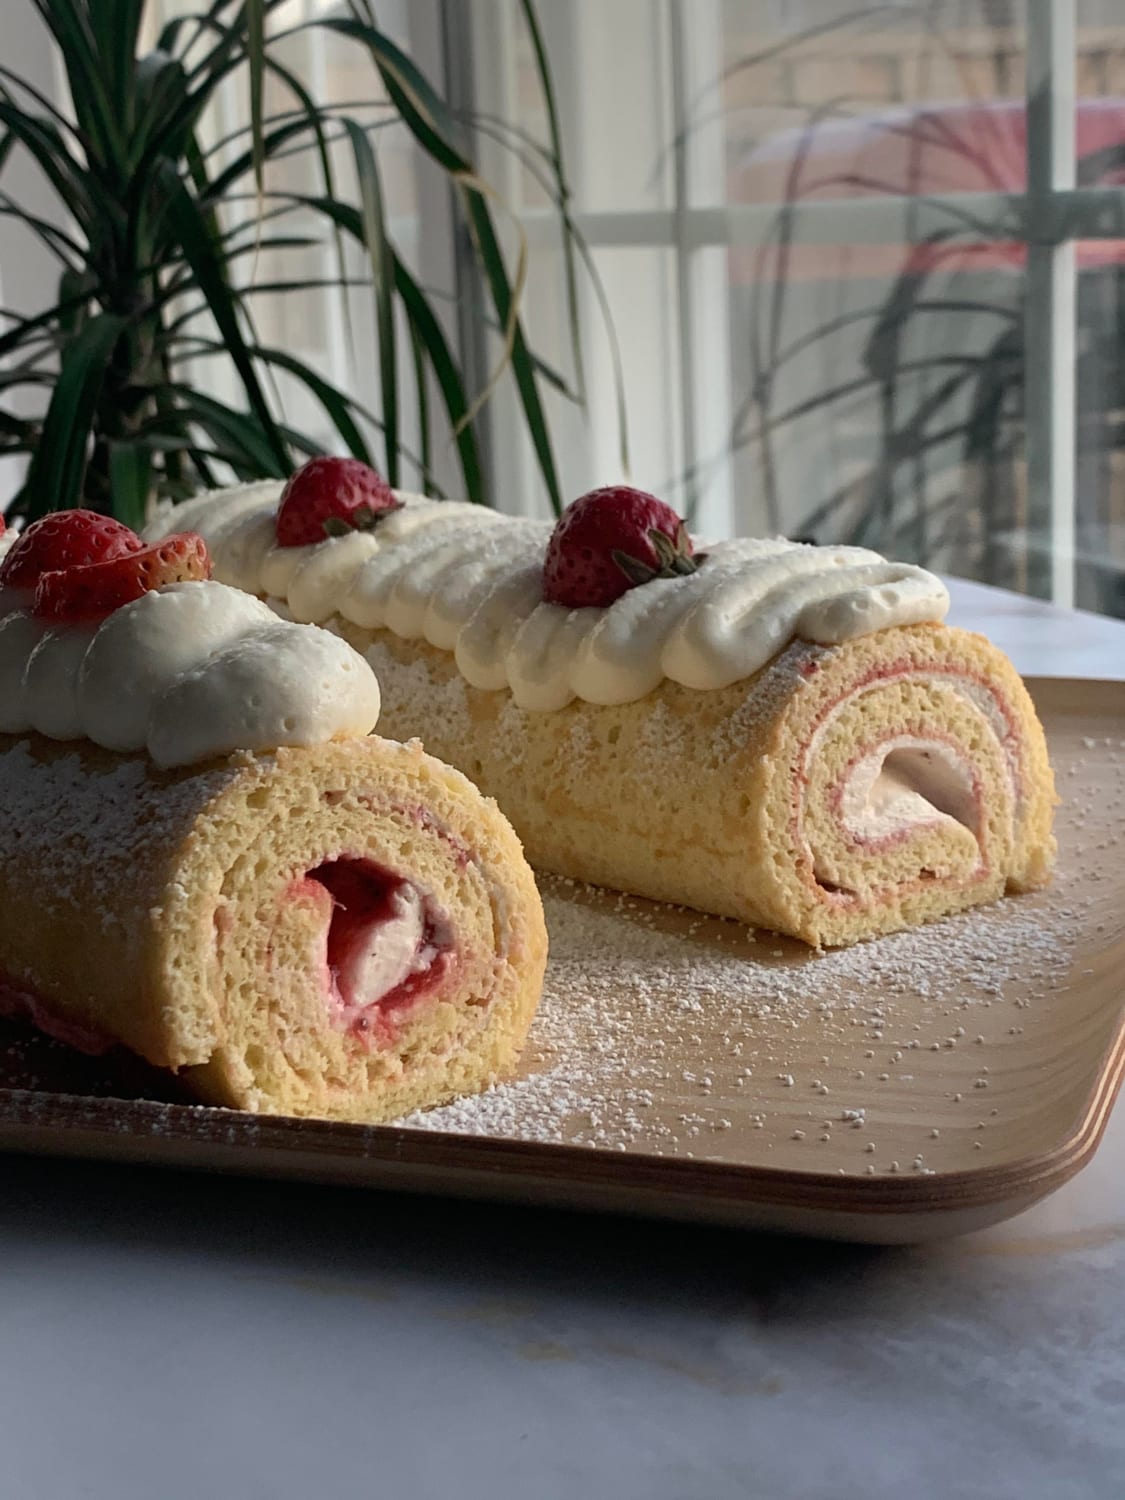 I made some Strawberry Roll Cakes